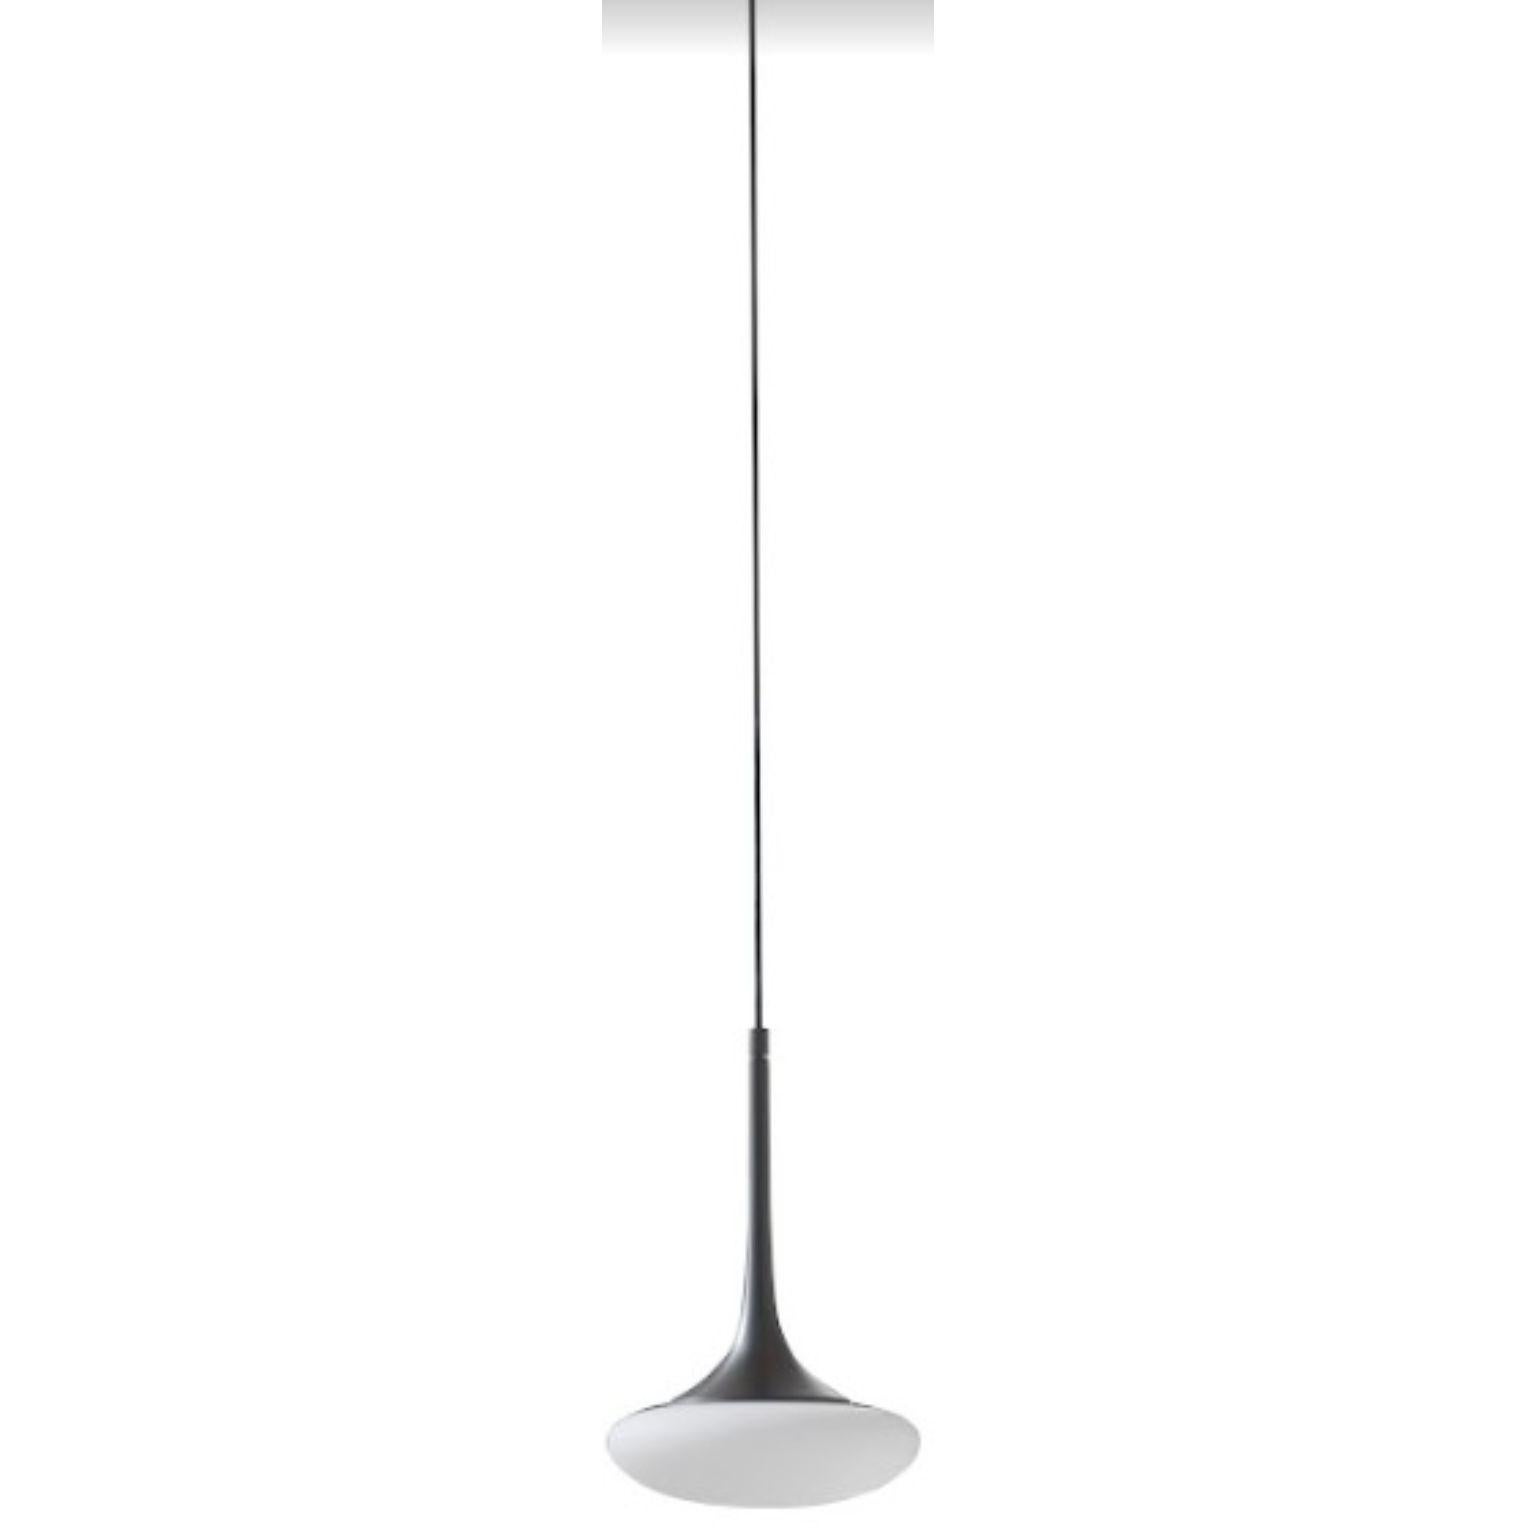 Louis XS pendant by Emilie Cathelineau
Dimensions: D 24 x H 239.3 cm
Materials: Solid brass, Mouth-blown glass, Textile cable
Others finishes and dimensions are available.

All our lamps can be wired according to each country. If sold to the